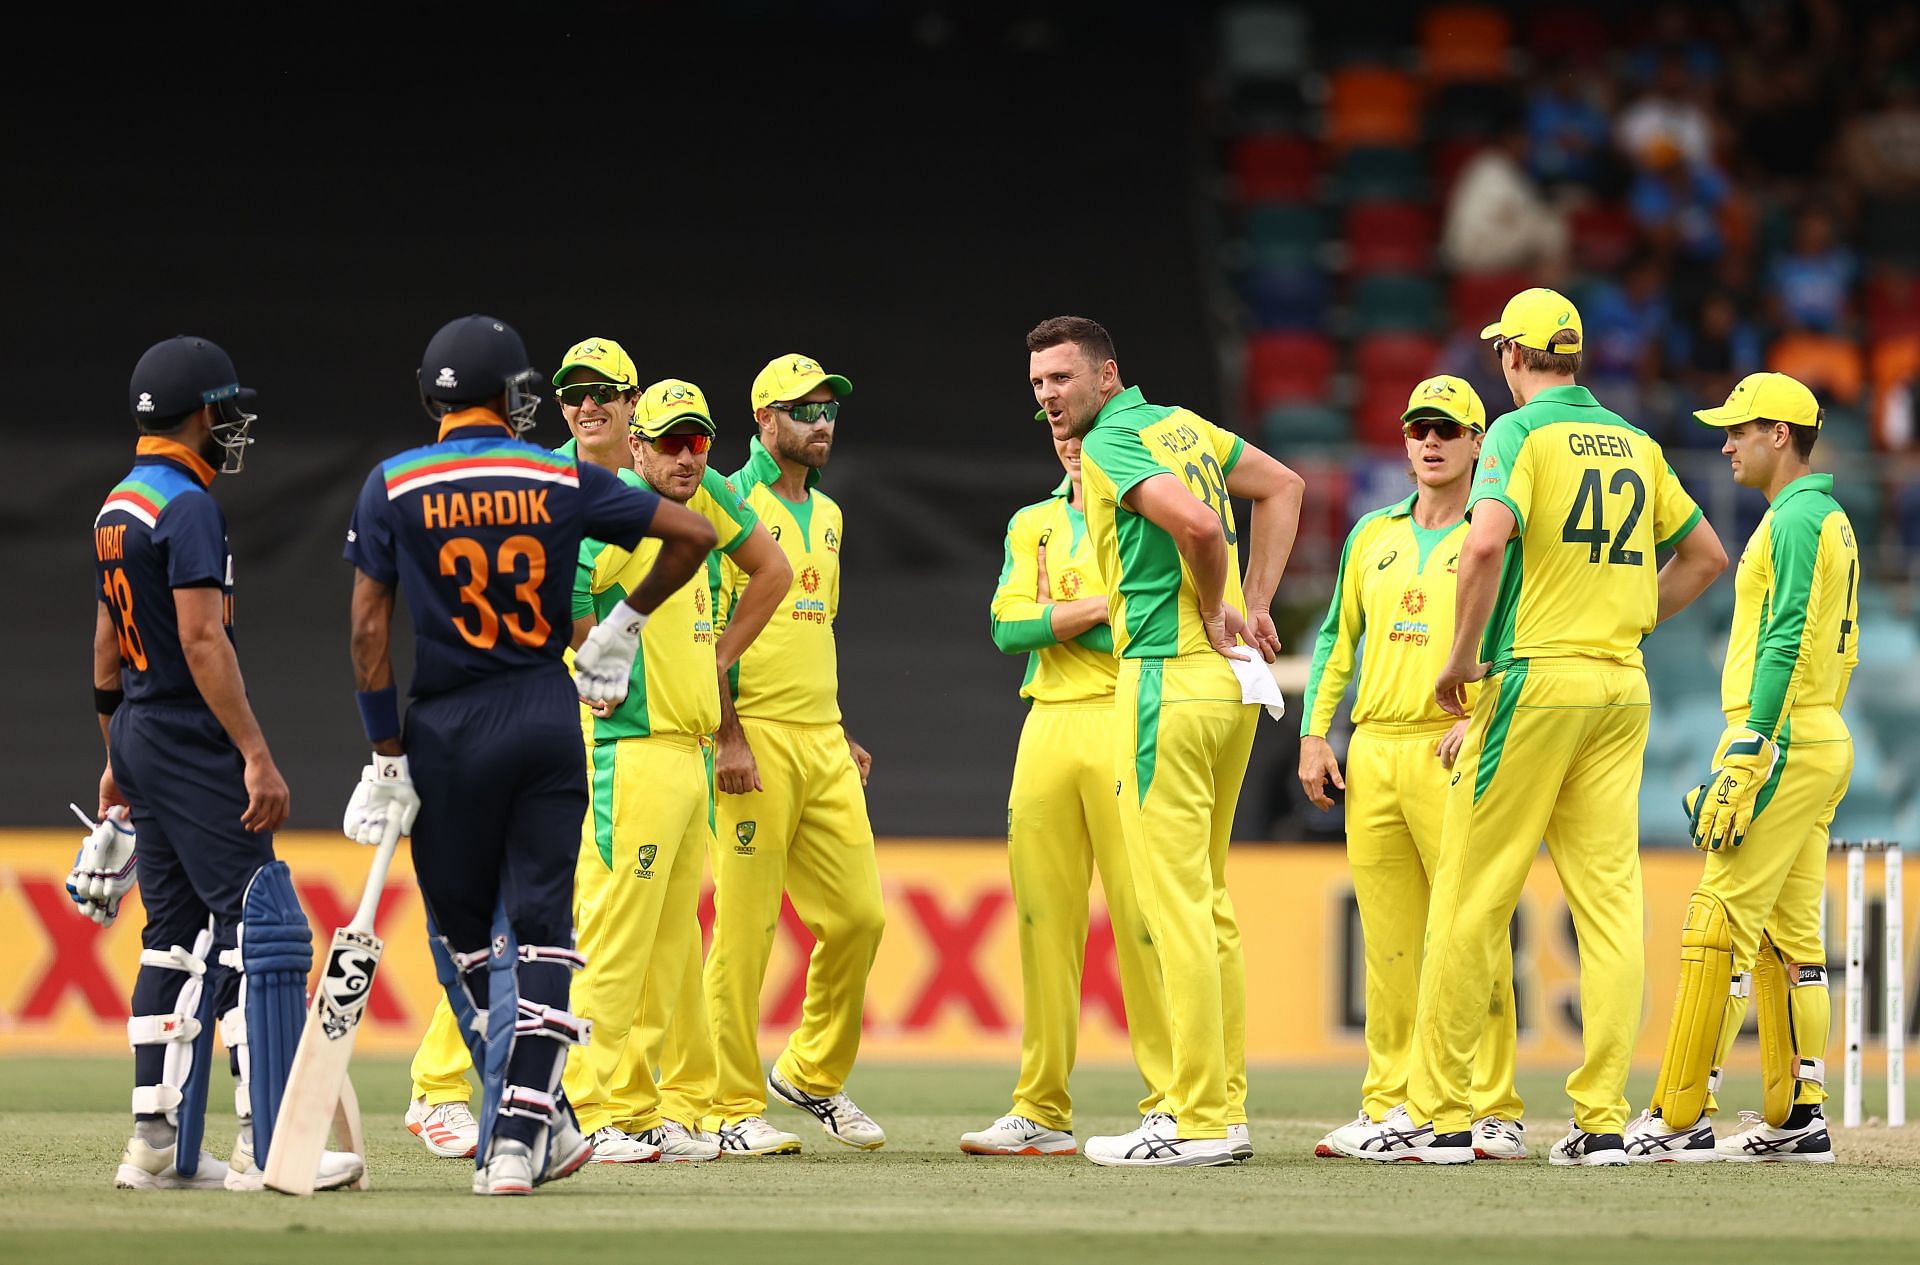 There has been an excess of bilateral 50-over series involving India and Australia.